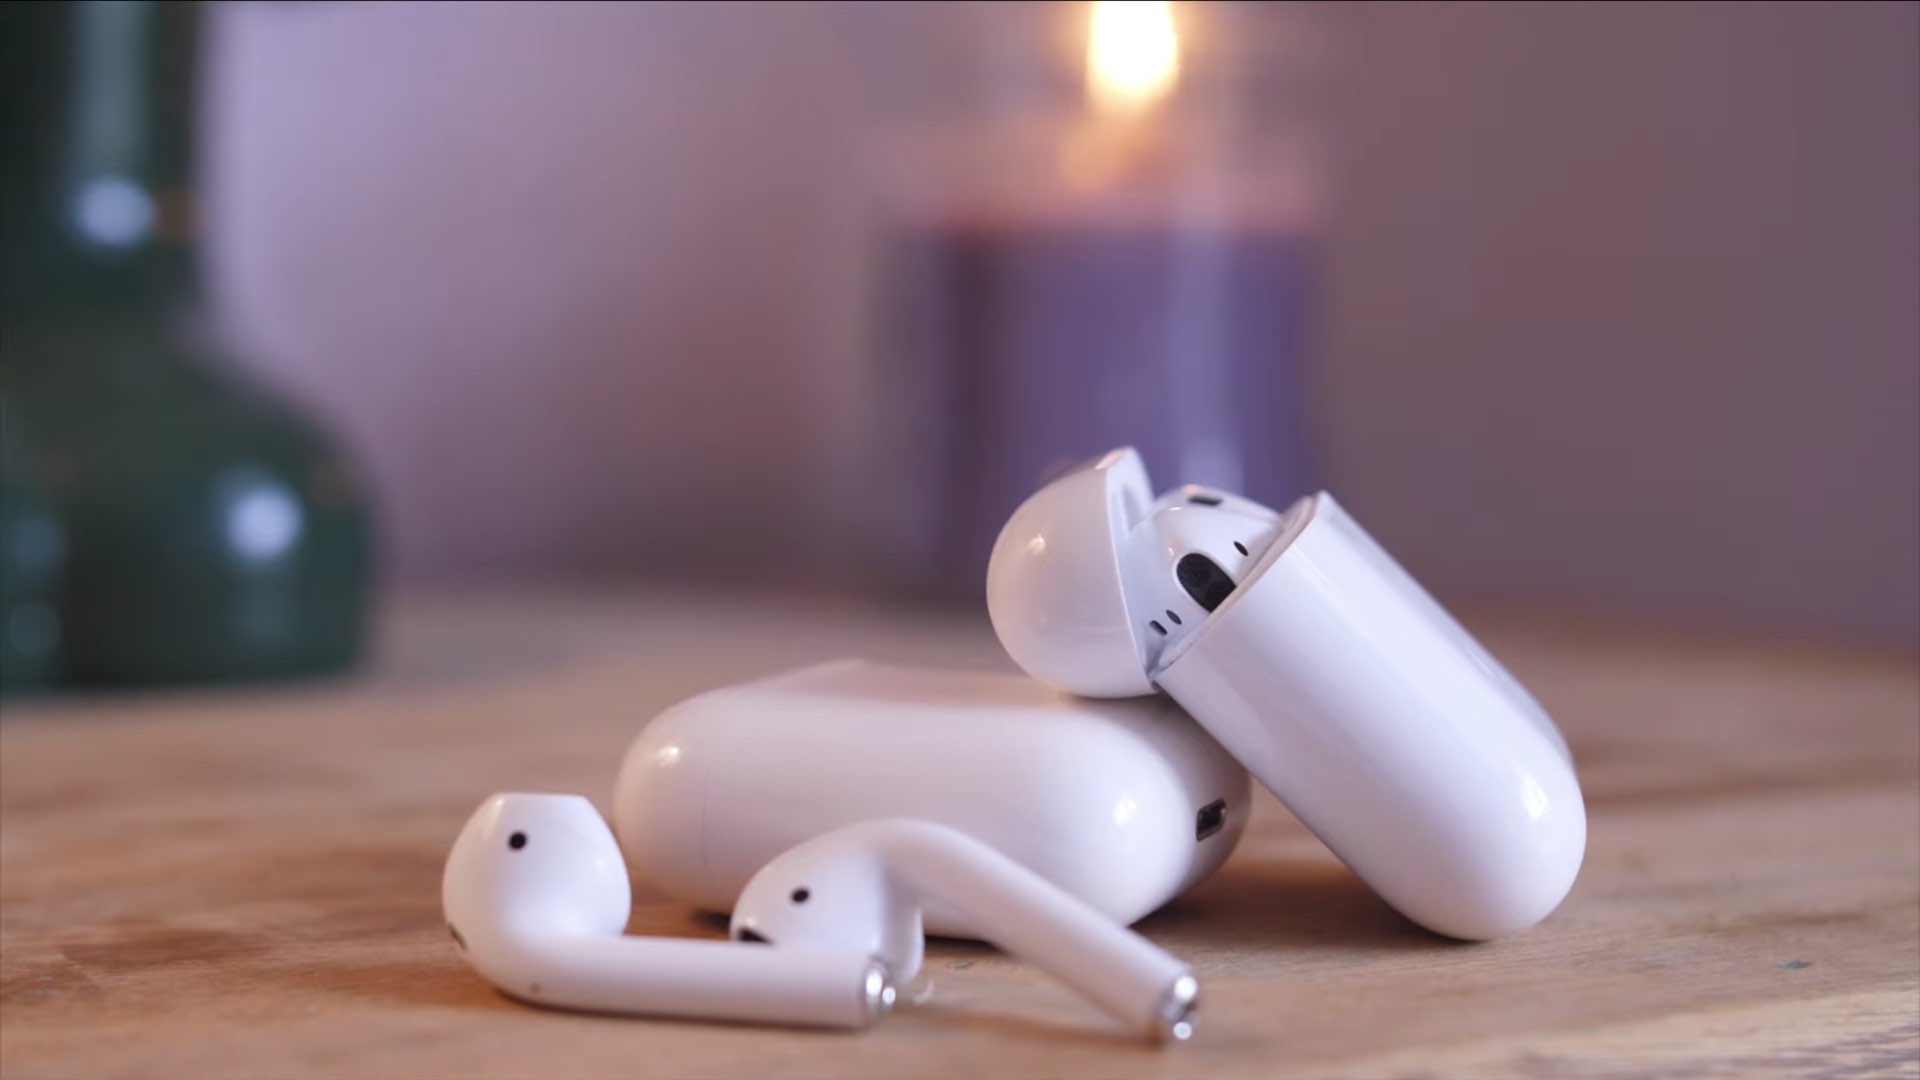 Noise-cancelling AirPods Pro rumored to arrive this month with a price